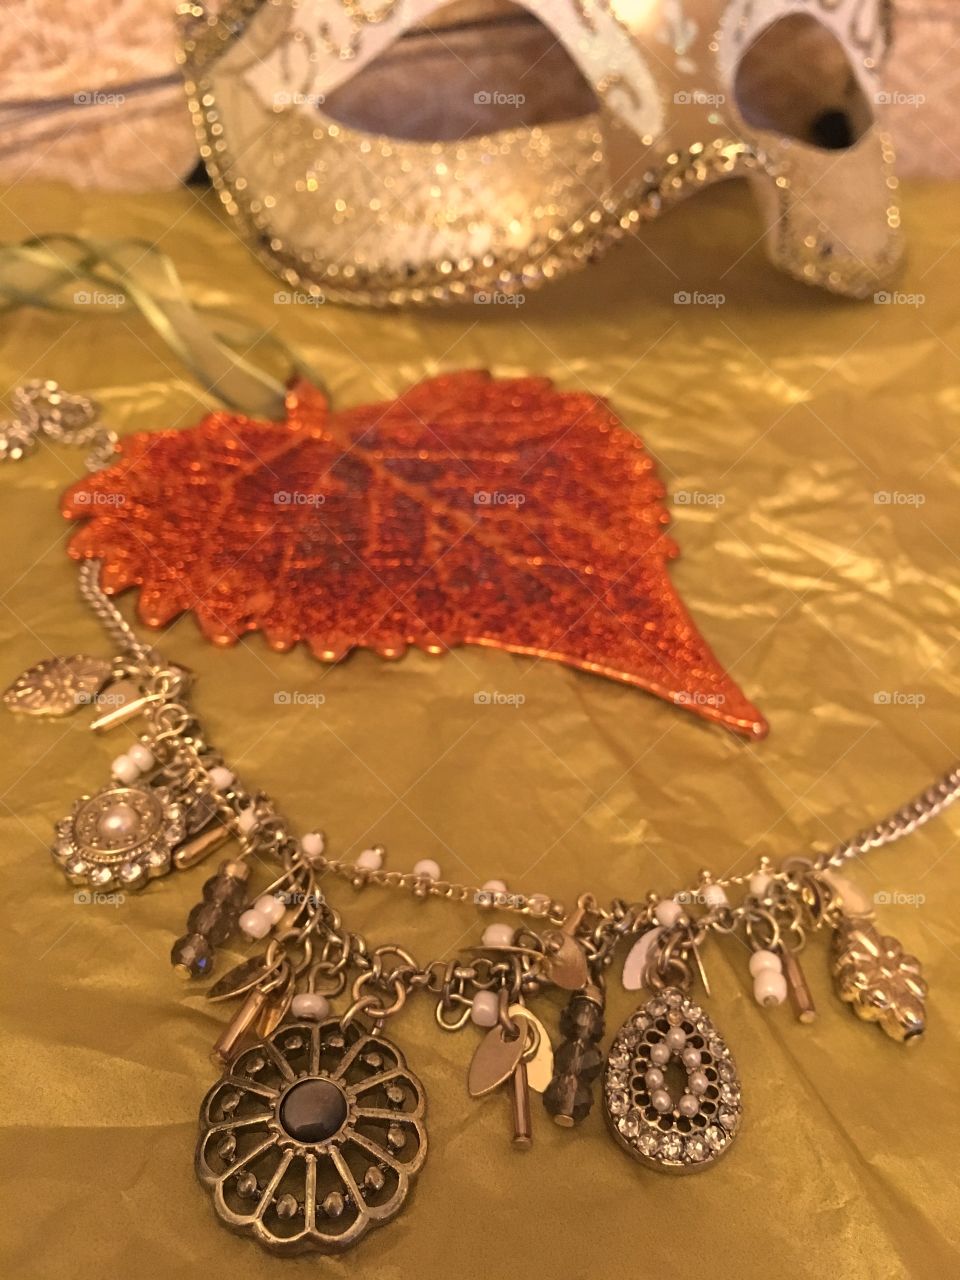 Gold charm necklace with a metallised cottonwood leaf decoration with masquerade mask in background 